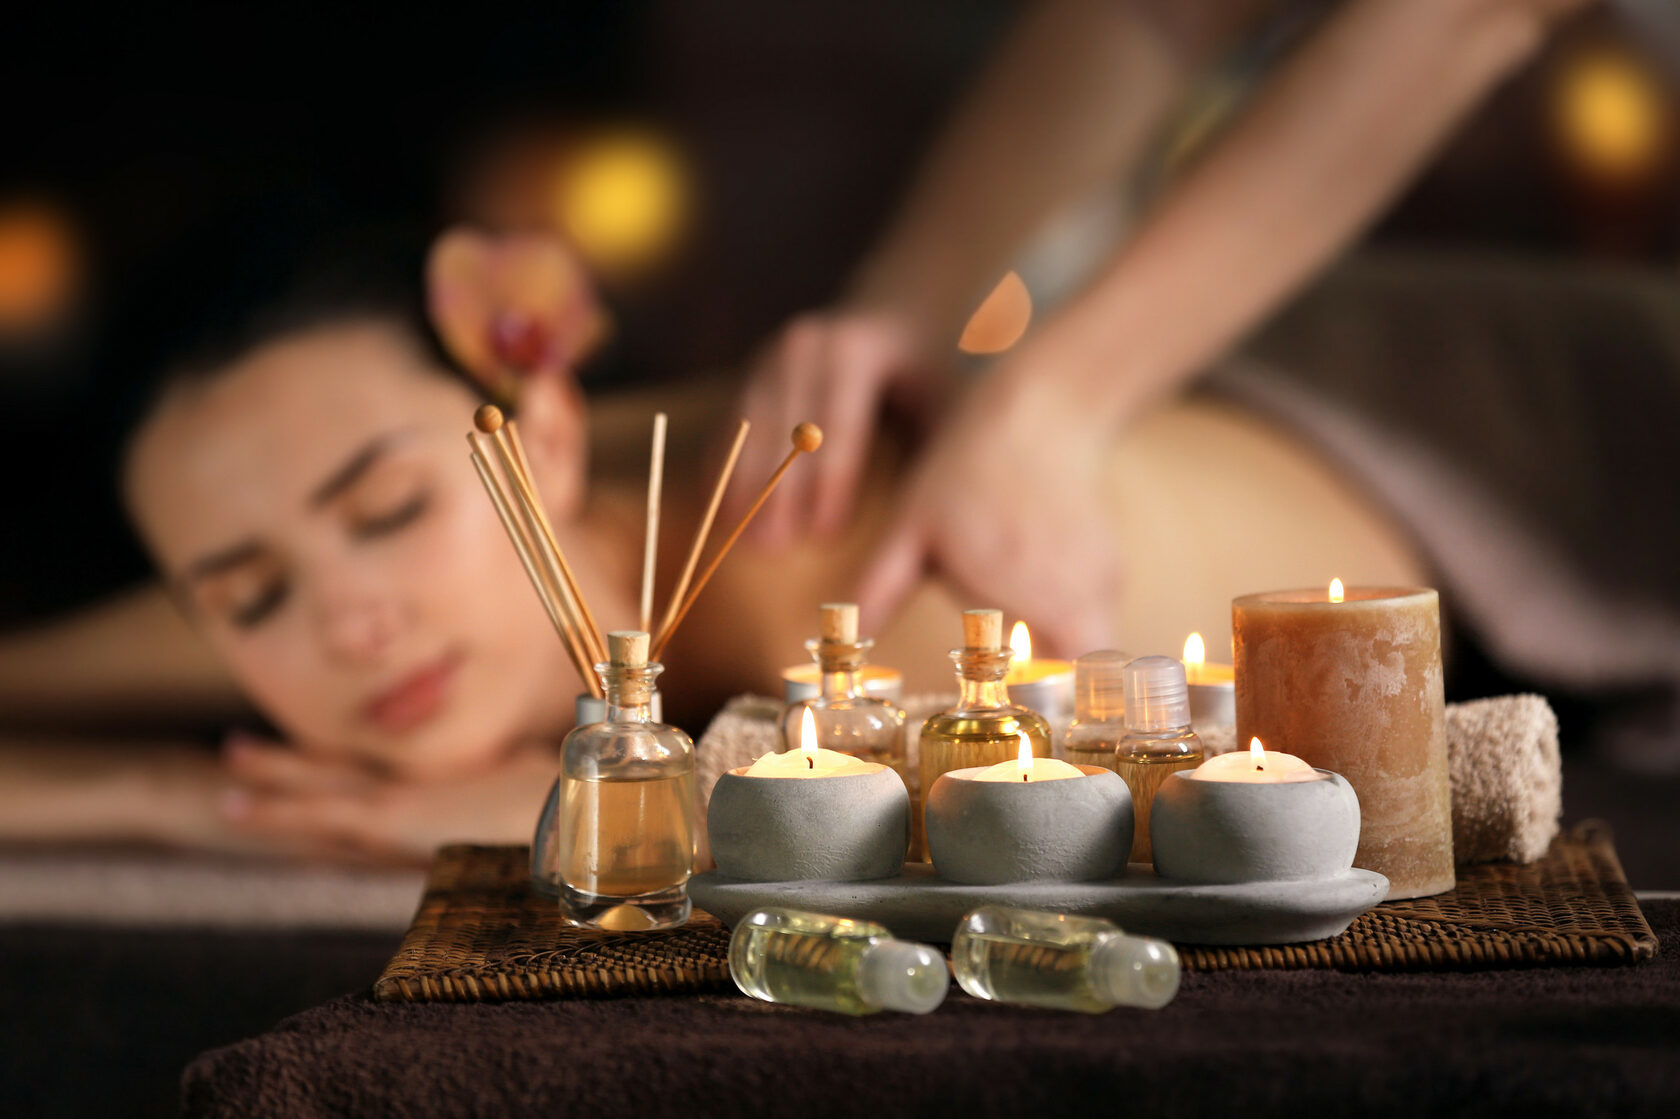 How to do aromatherapy massage?